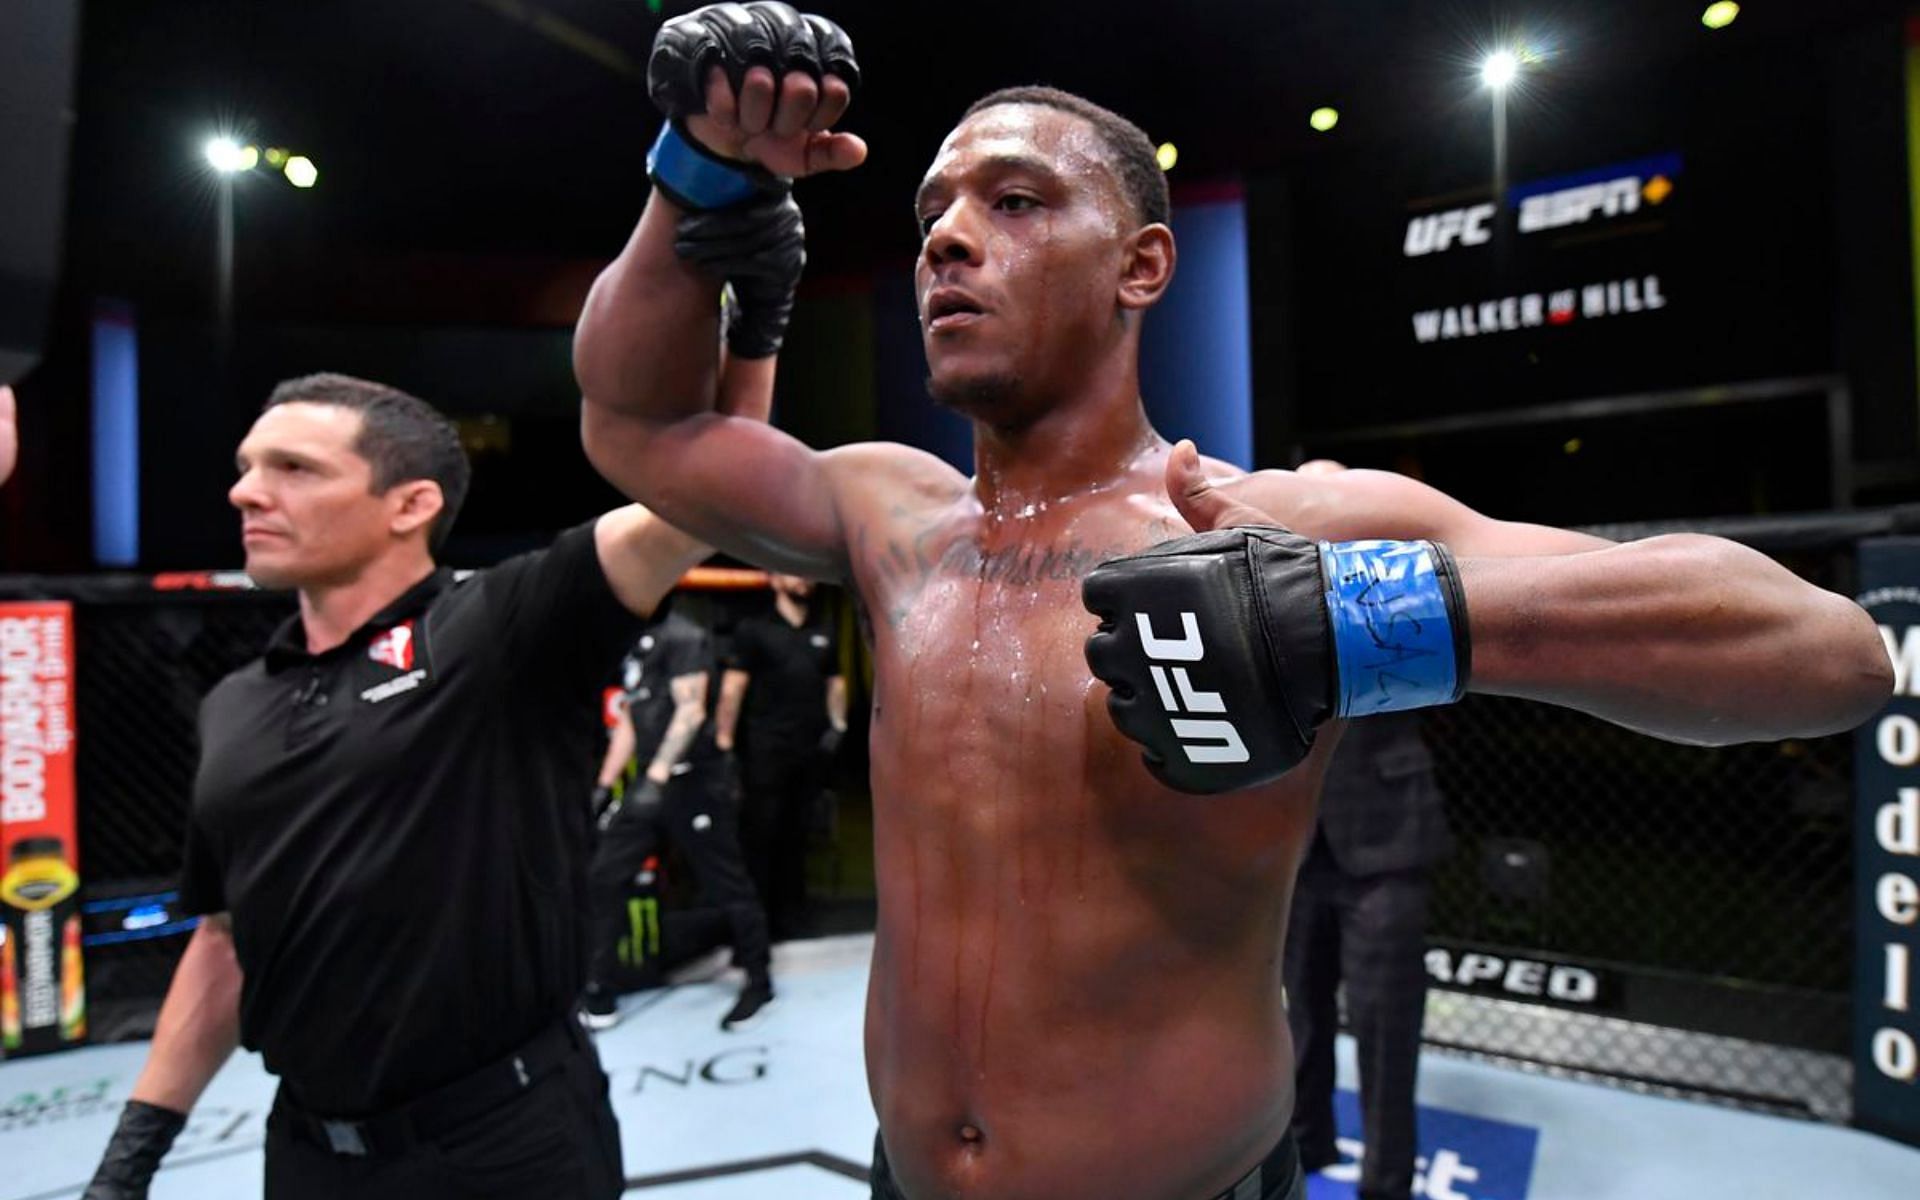 Jamahal Hill was last night&rsquo;s biggest winner after his knockout victory over Johnny Walker.